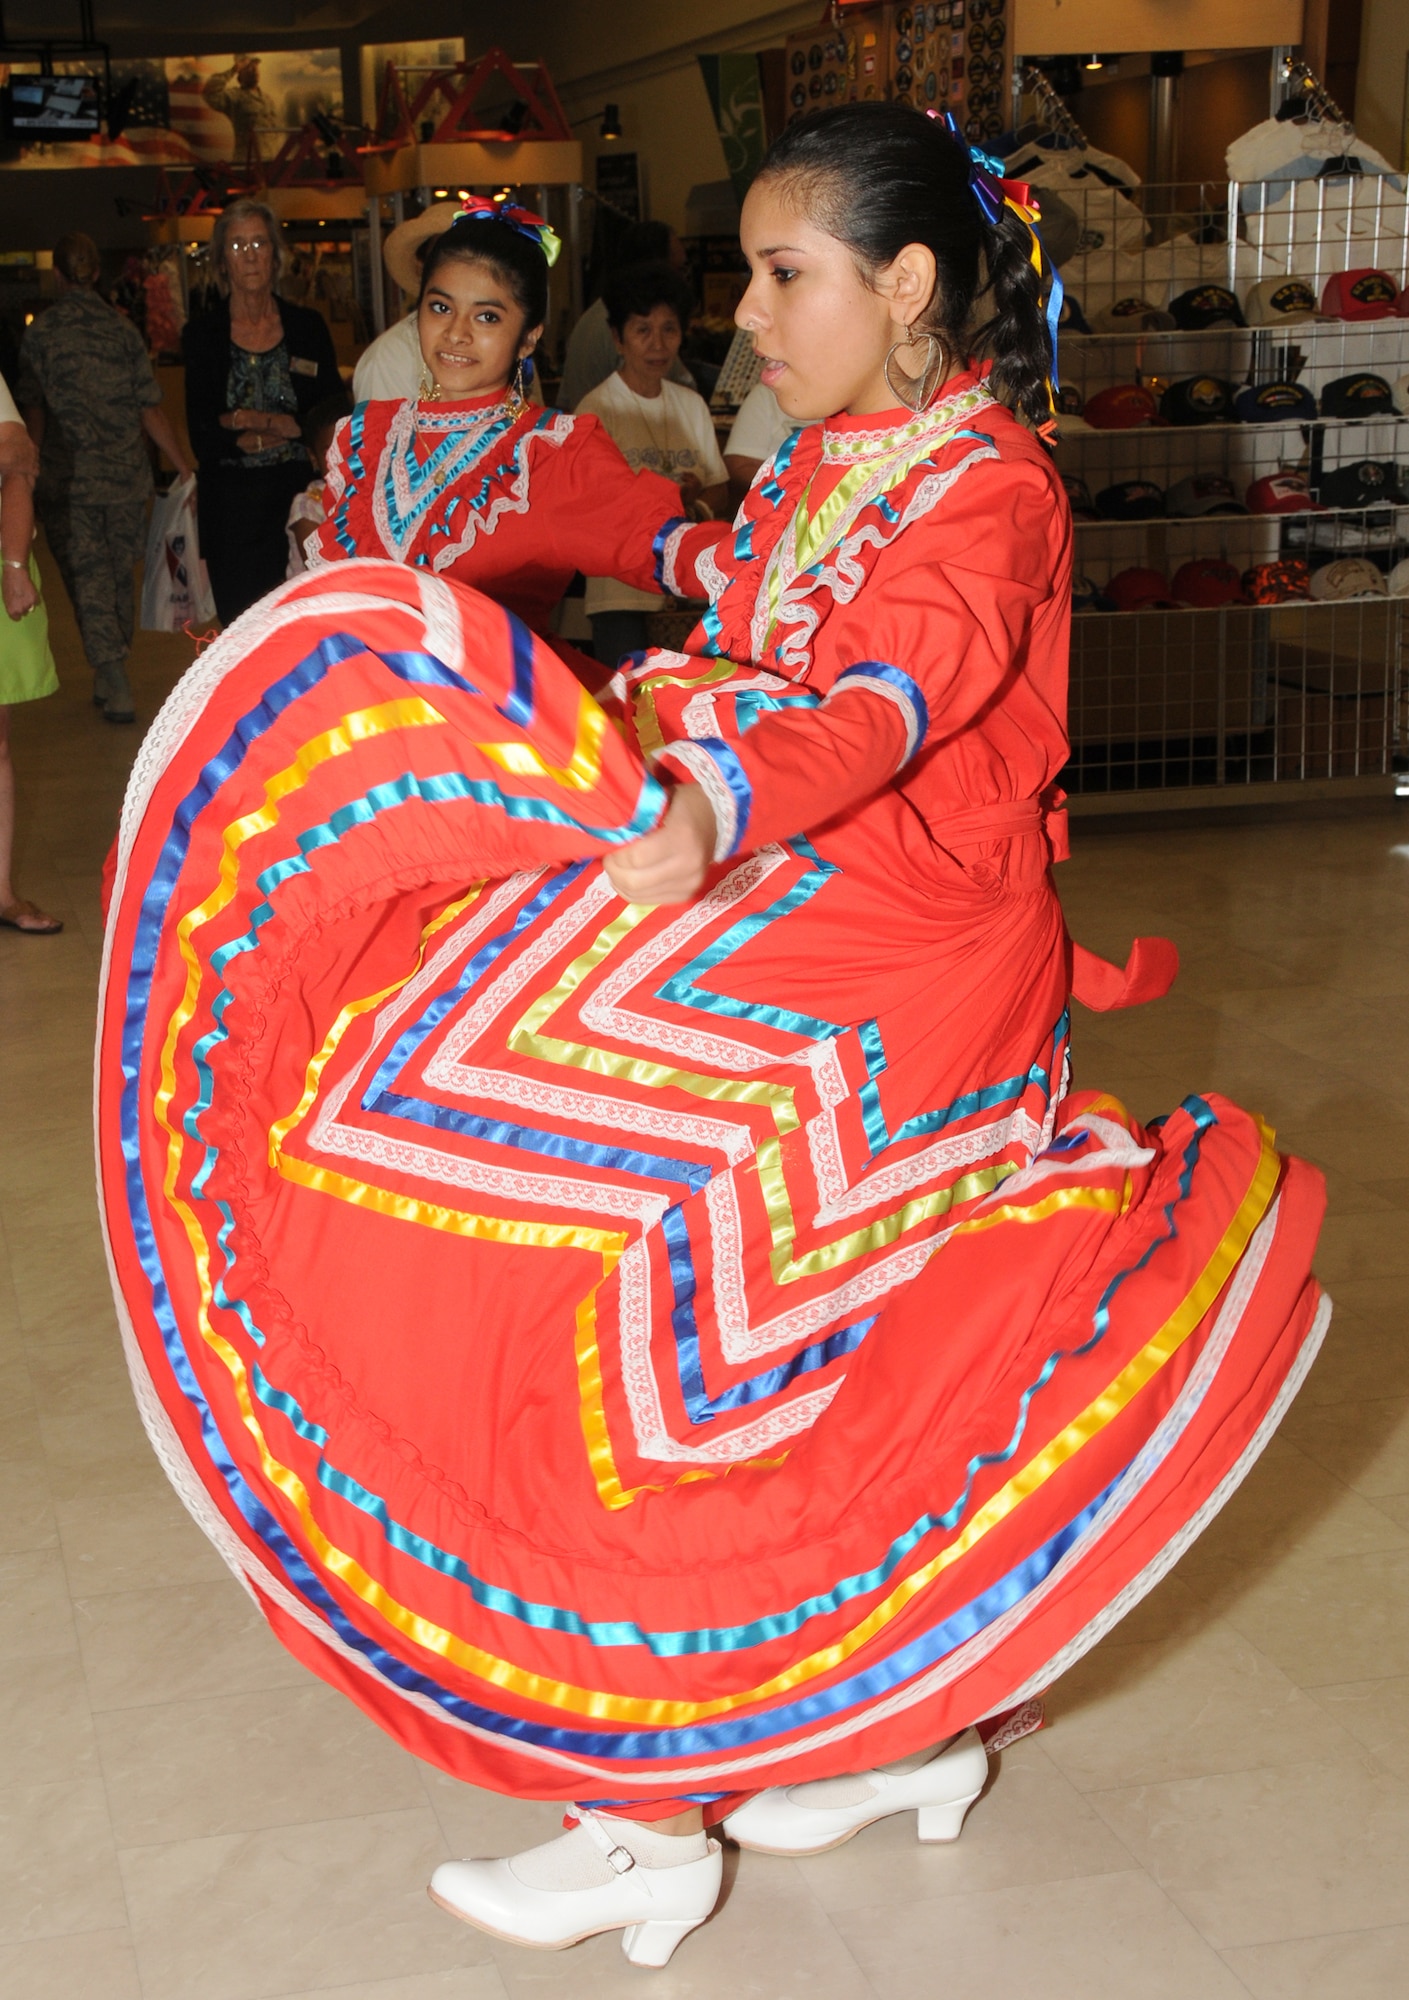 From left, 15-year olds Mariela Albendriz and Erica Plascencia perform a traditional Mexican dance with Vicentenario de Mexico group from Gautier at Saturday’s Hispanic Heritage Month celebration at the main exchange at Keesler Air Force Base, Miss.  Their parents are Estela and Jose Albendriz and Elizabeth and Angel Plascencia.  (U.S. Air Force photo by Kemberly Groue)